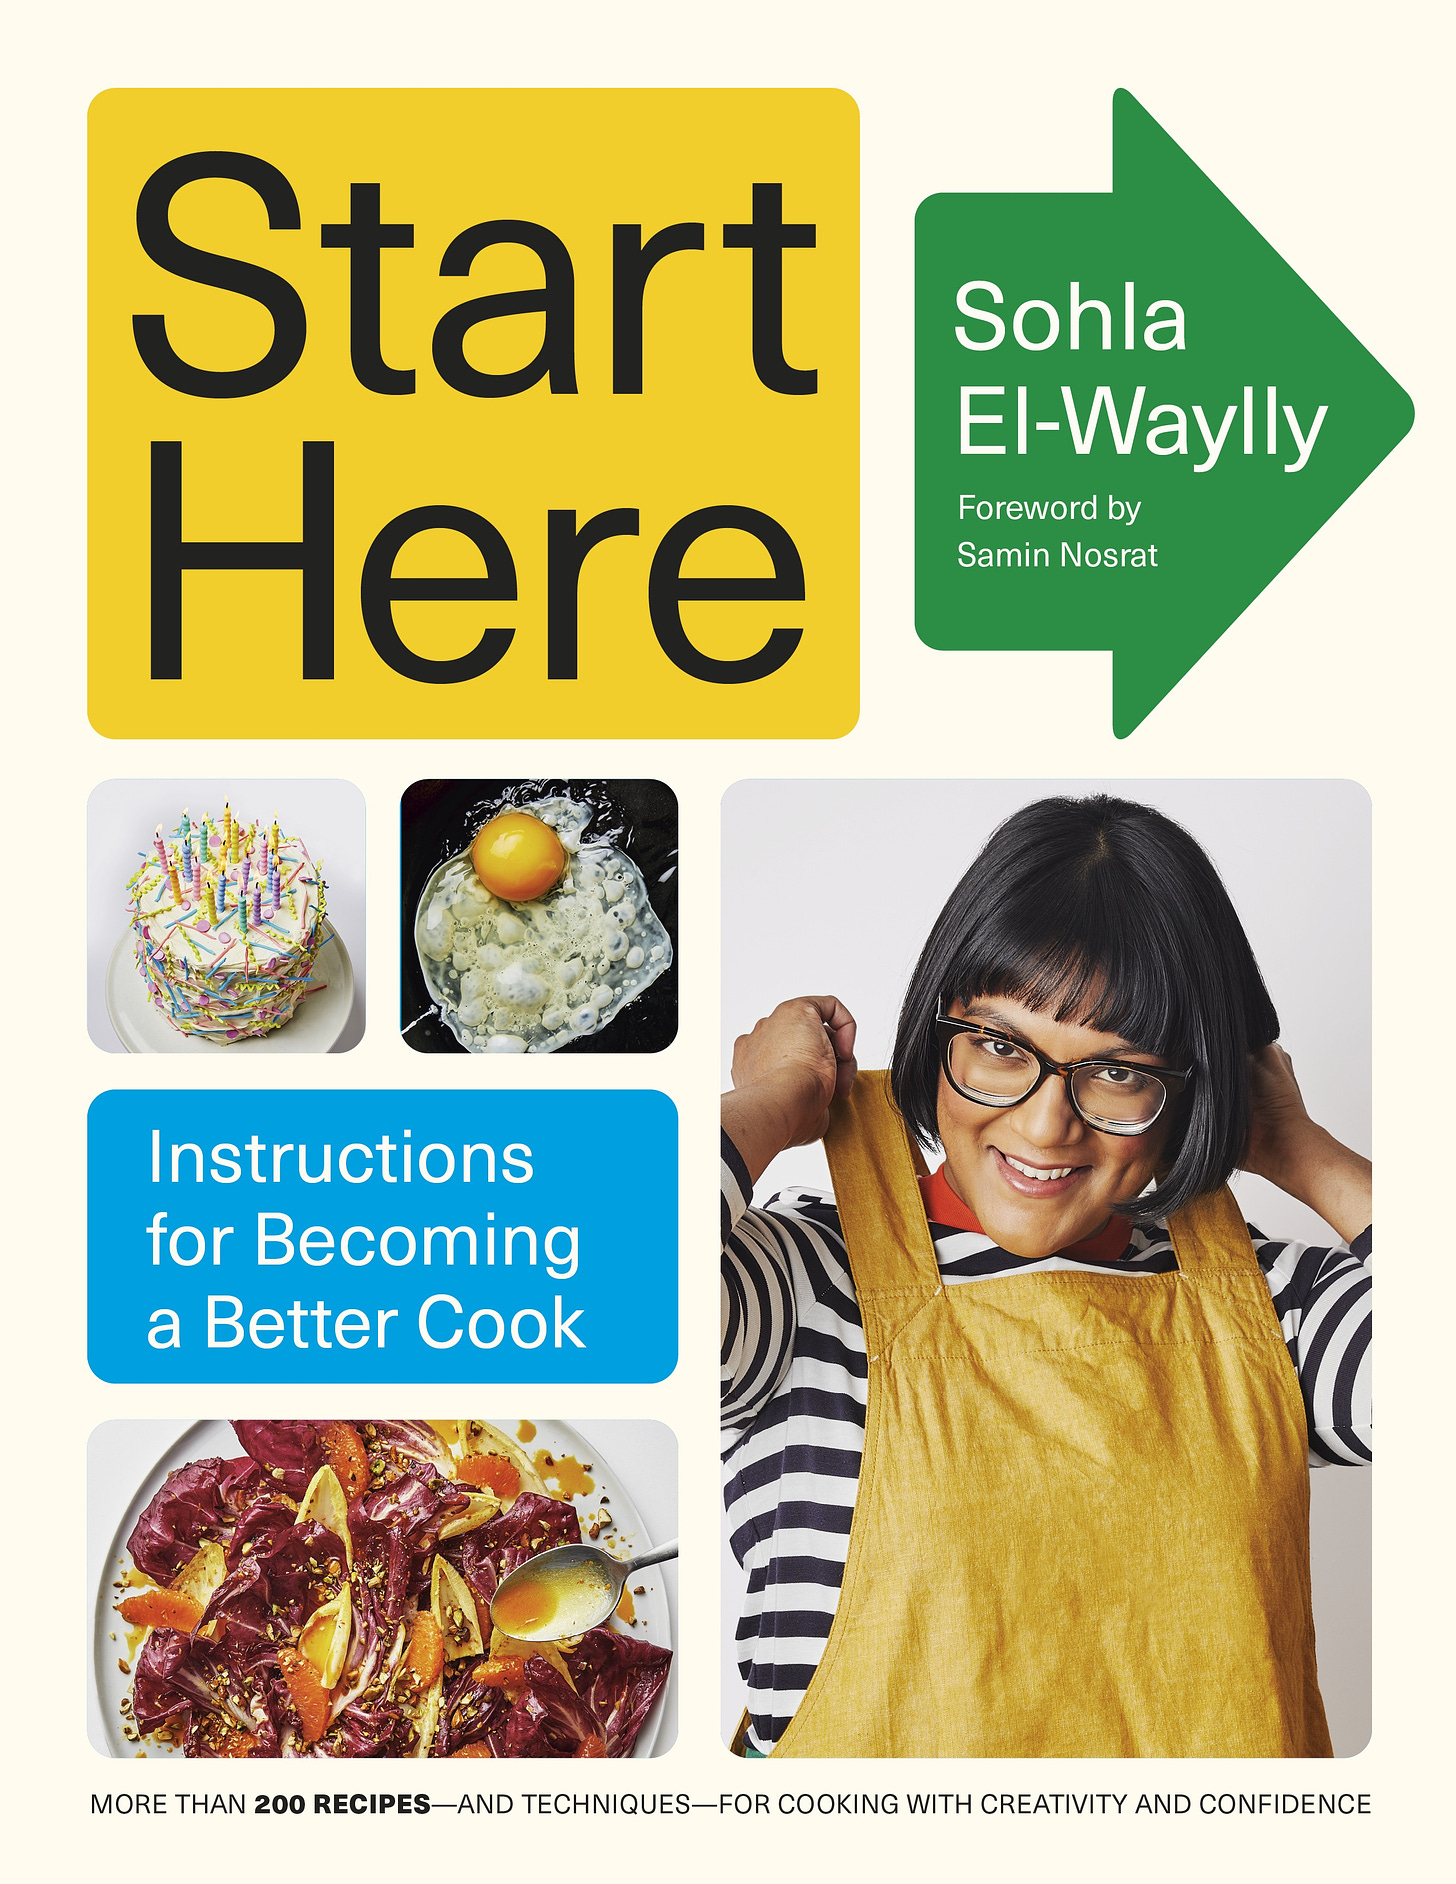 The cover of Sohla El-Waylly's new cookbook Start Here: Instructions for Becoming a Better Cook; it features an image of the author smiling as she puts on an apron, as well as an image of a birthday cake, an egg frying, and a citrus and endive salad, as well as the book's title and the author's name